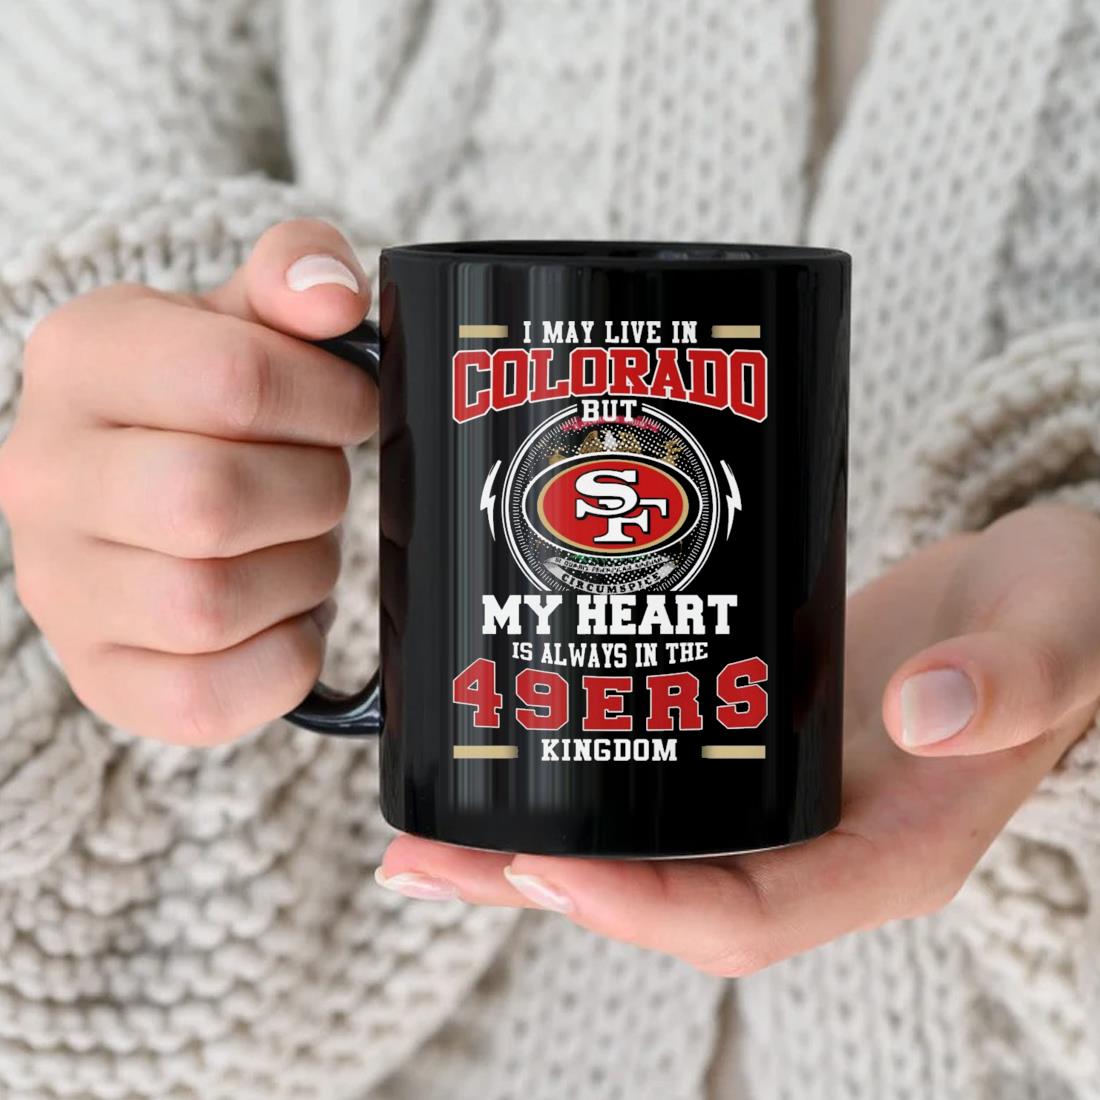 I May Live In Colorado But My Heart Is Always In The 49ers Kingdom Mug nhu